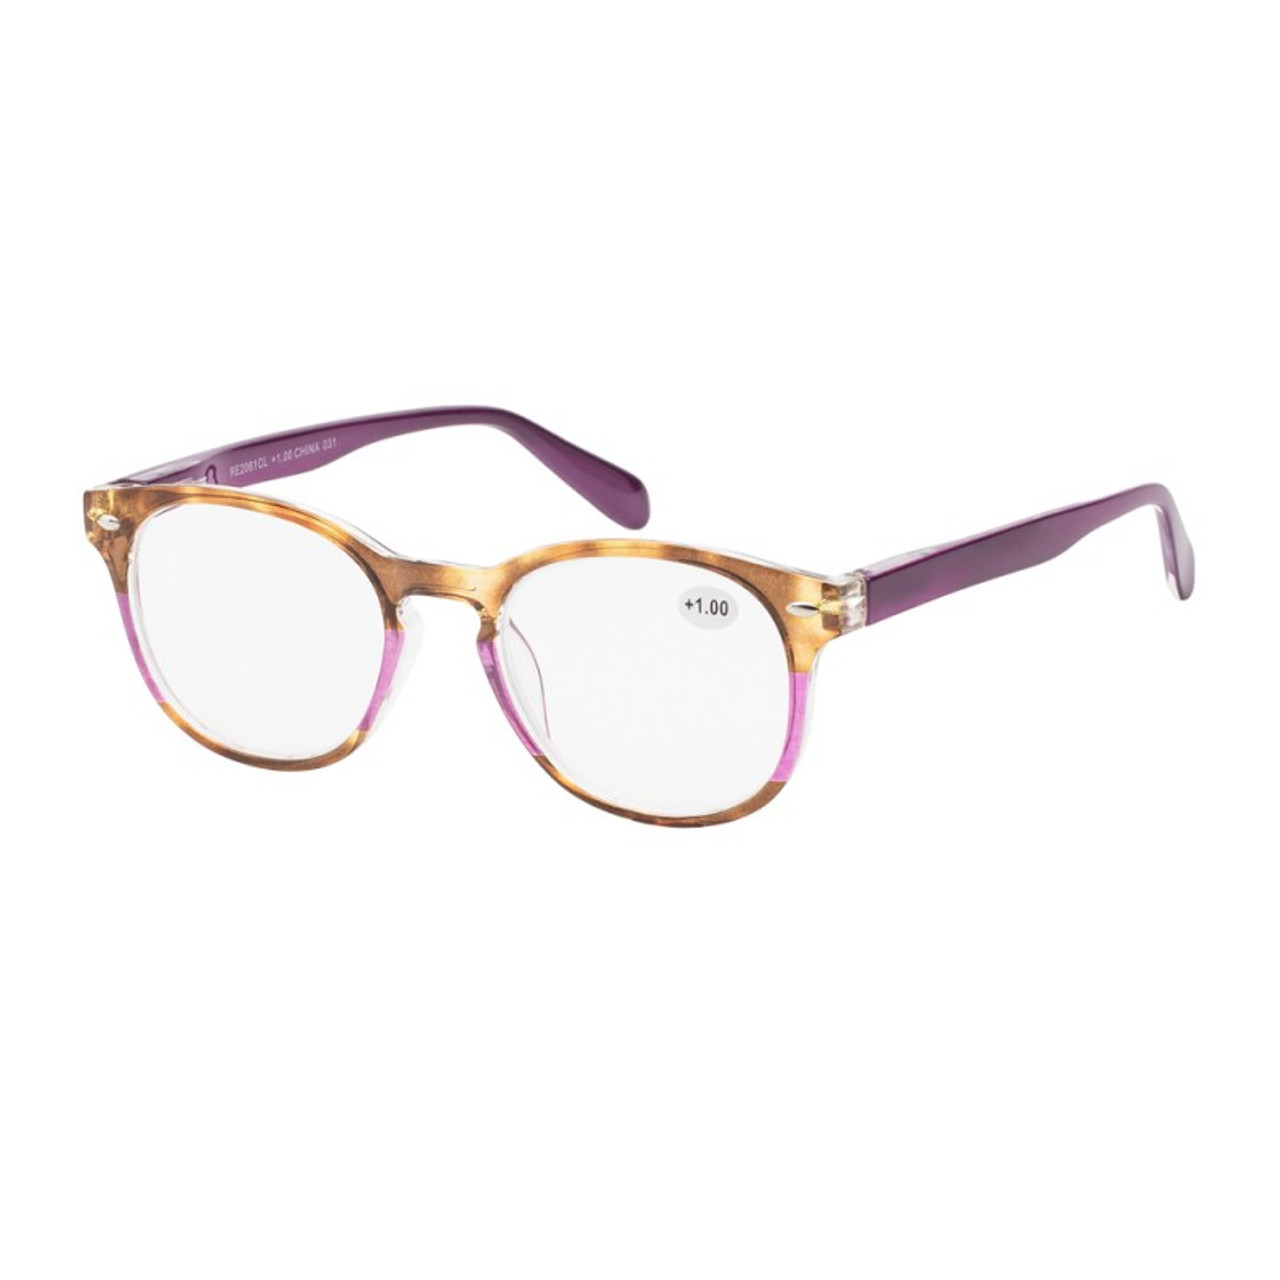 Tortoise Retro Round Readers in Several Colors 